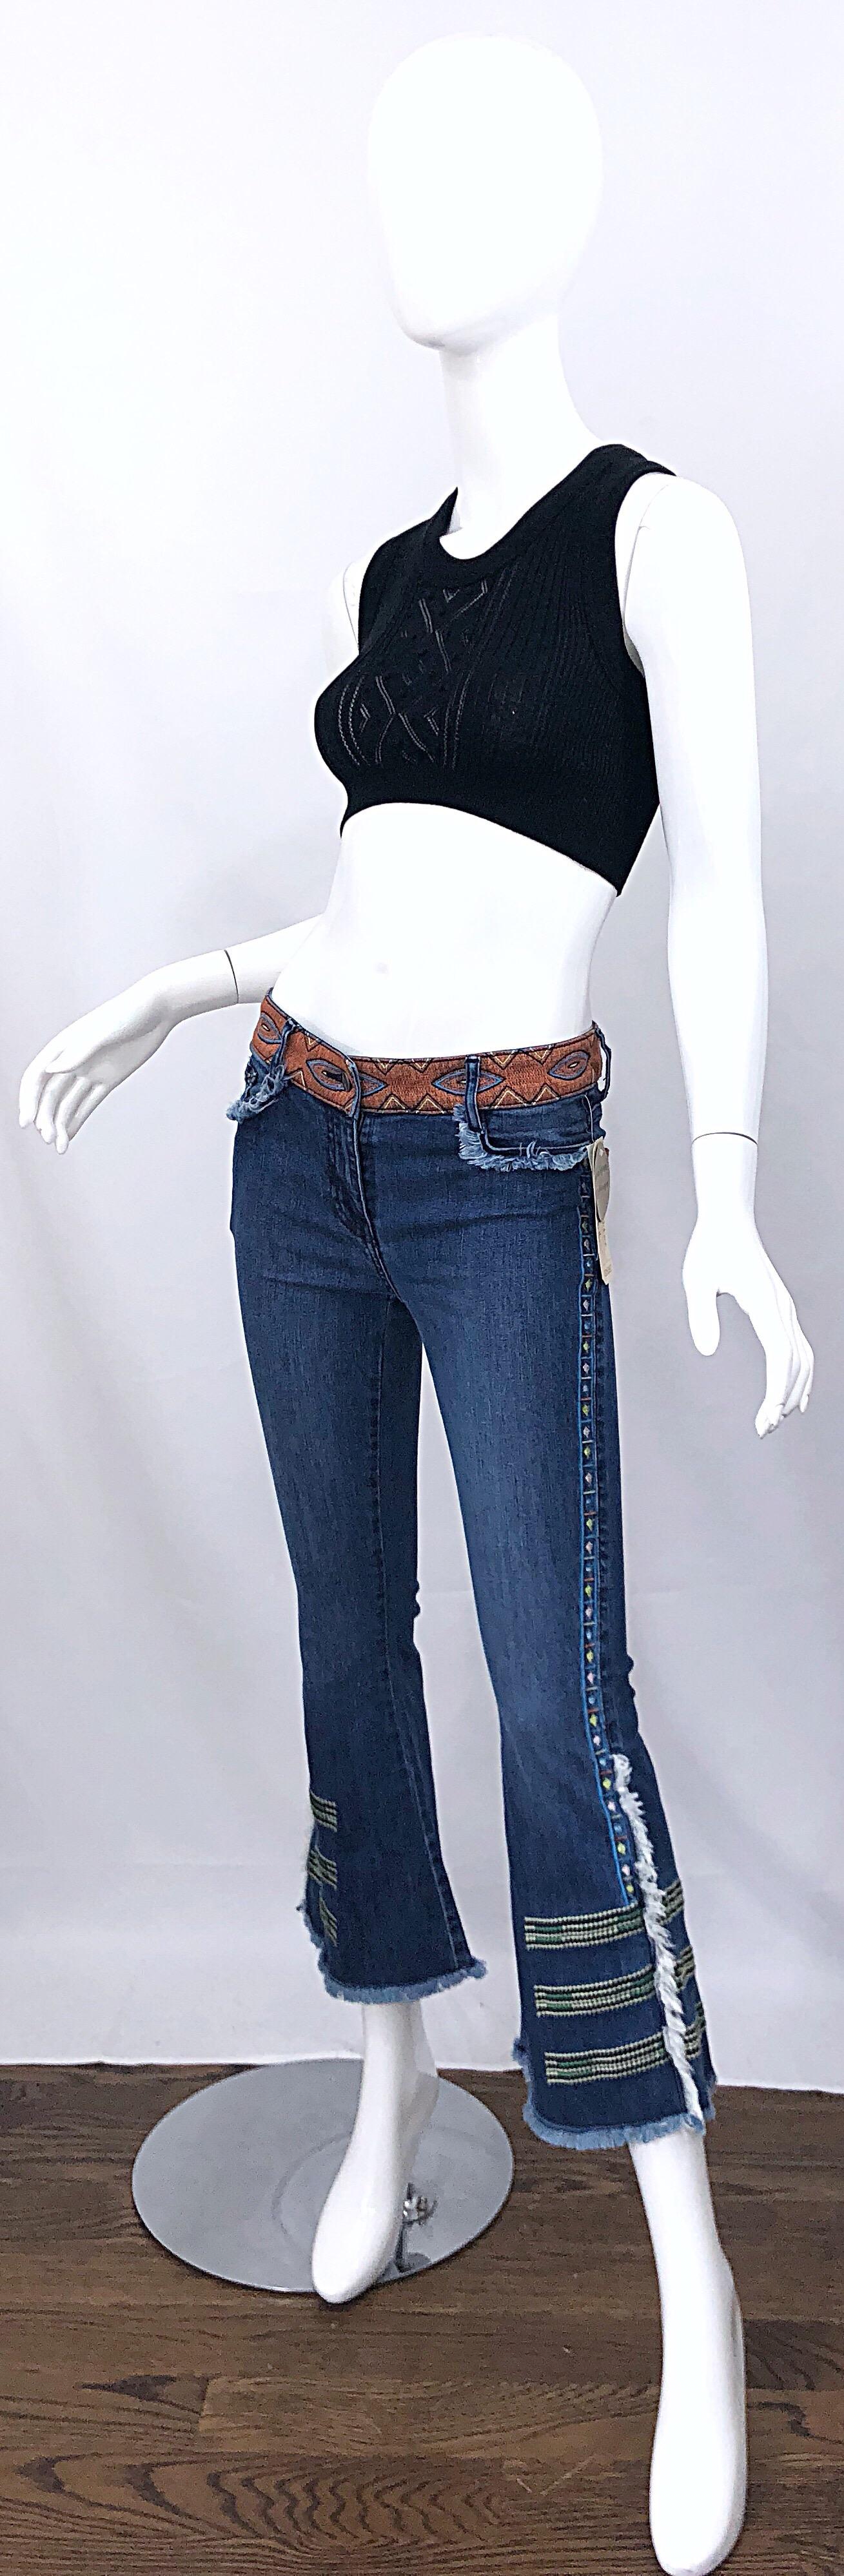 Rare NWT Early 2000s Nicole Miller Artelier Sz 26 Limited Edition Jeans Culottes For Sale 6